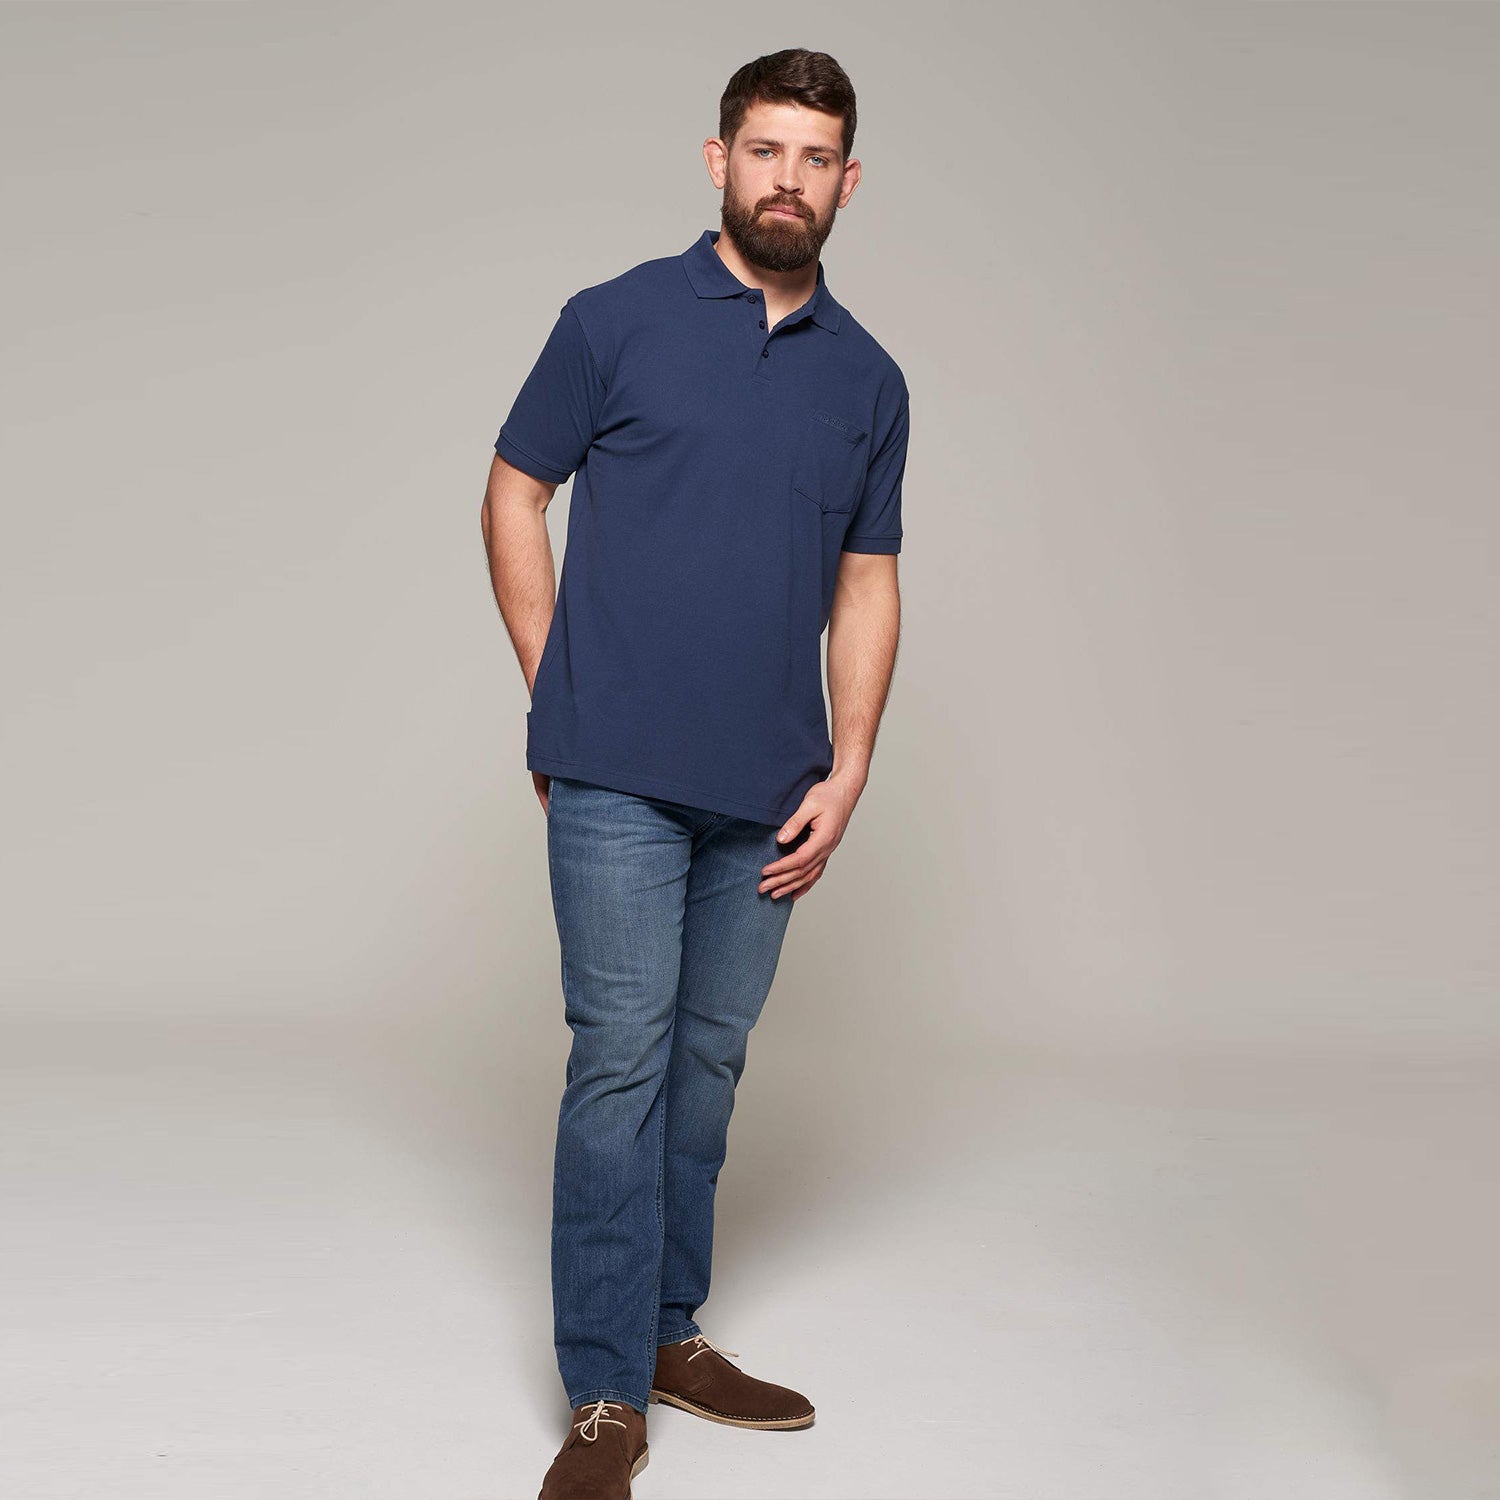 North 56°4 | Polo Shirt with Pocket in Navy Blue | Fortmens